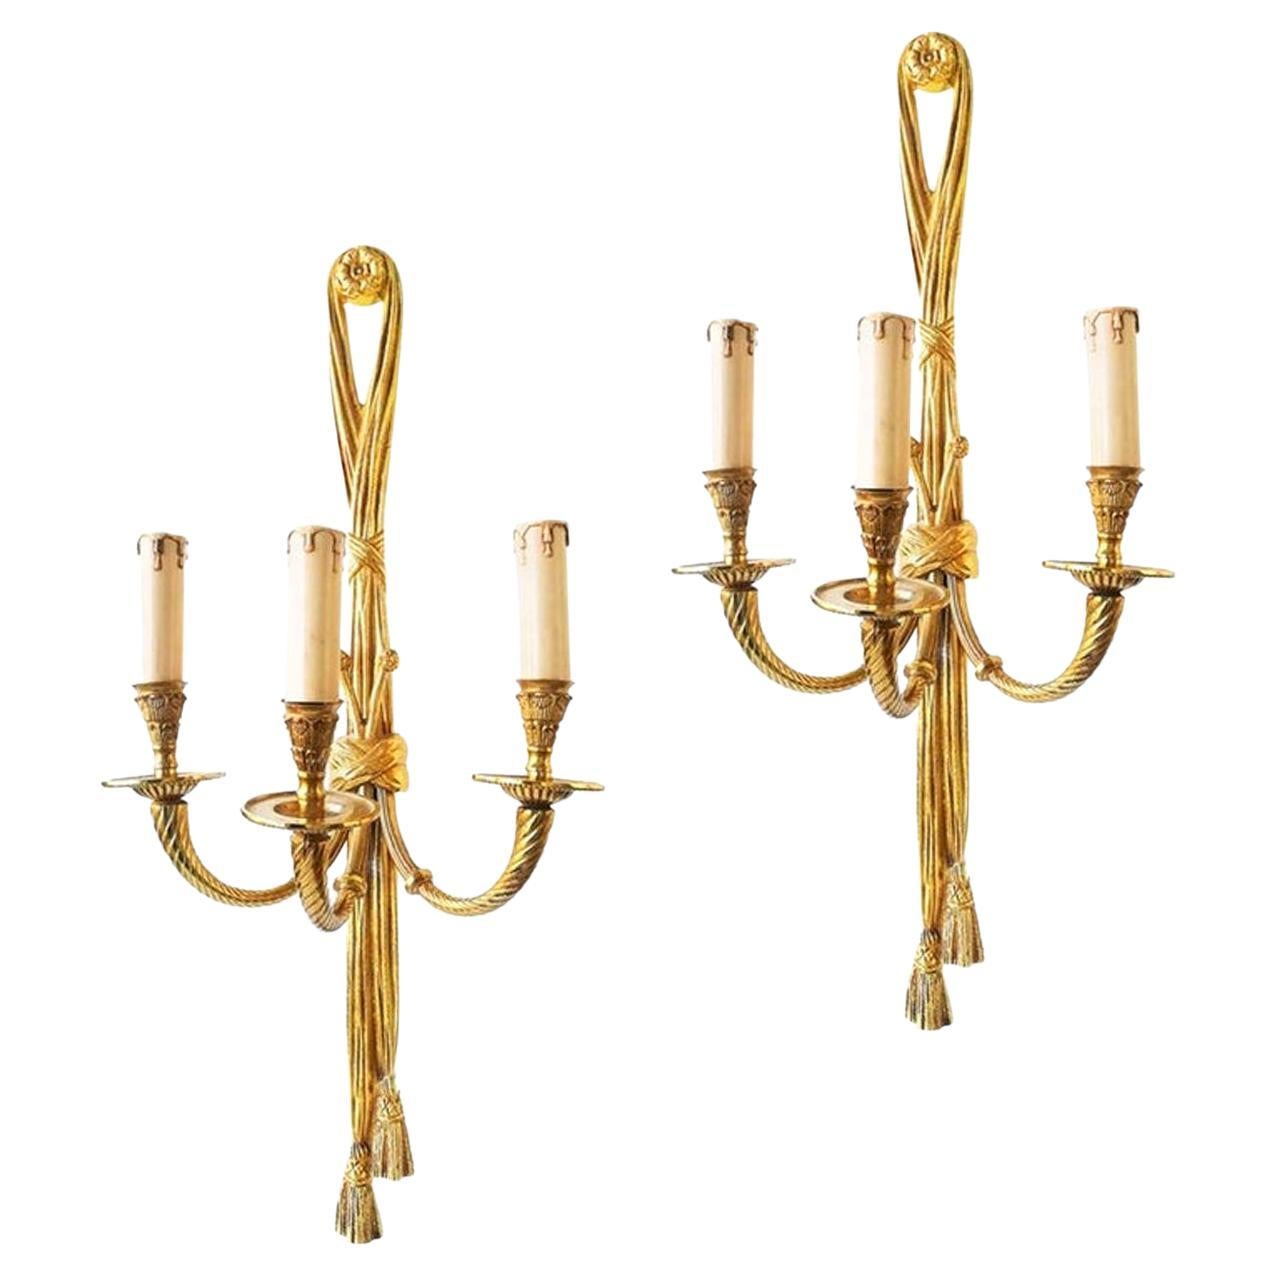 Pair of wall sconces bronze doré Louis XVI style of the first half of the 20th century.

This model of French wall lamps or sconces have illuminated the Europen Grand Hotels and Cafes with French-style decoration in Europe and around the world. This